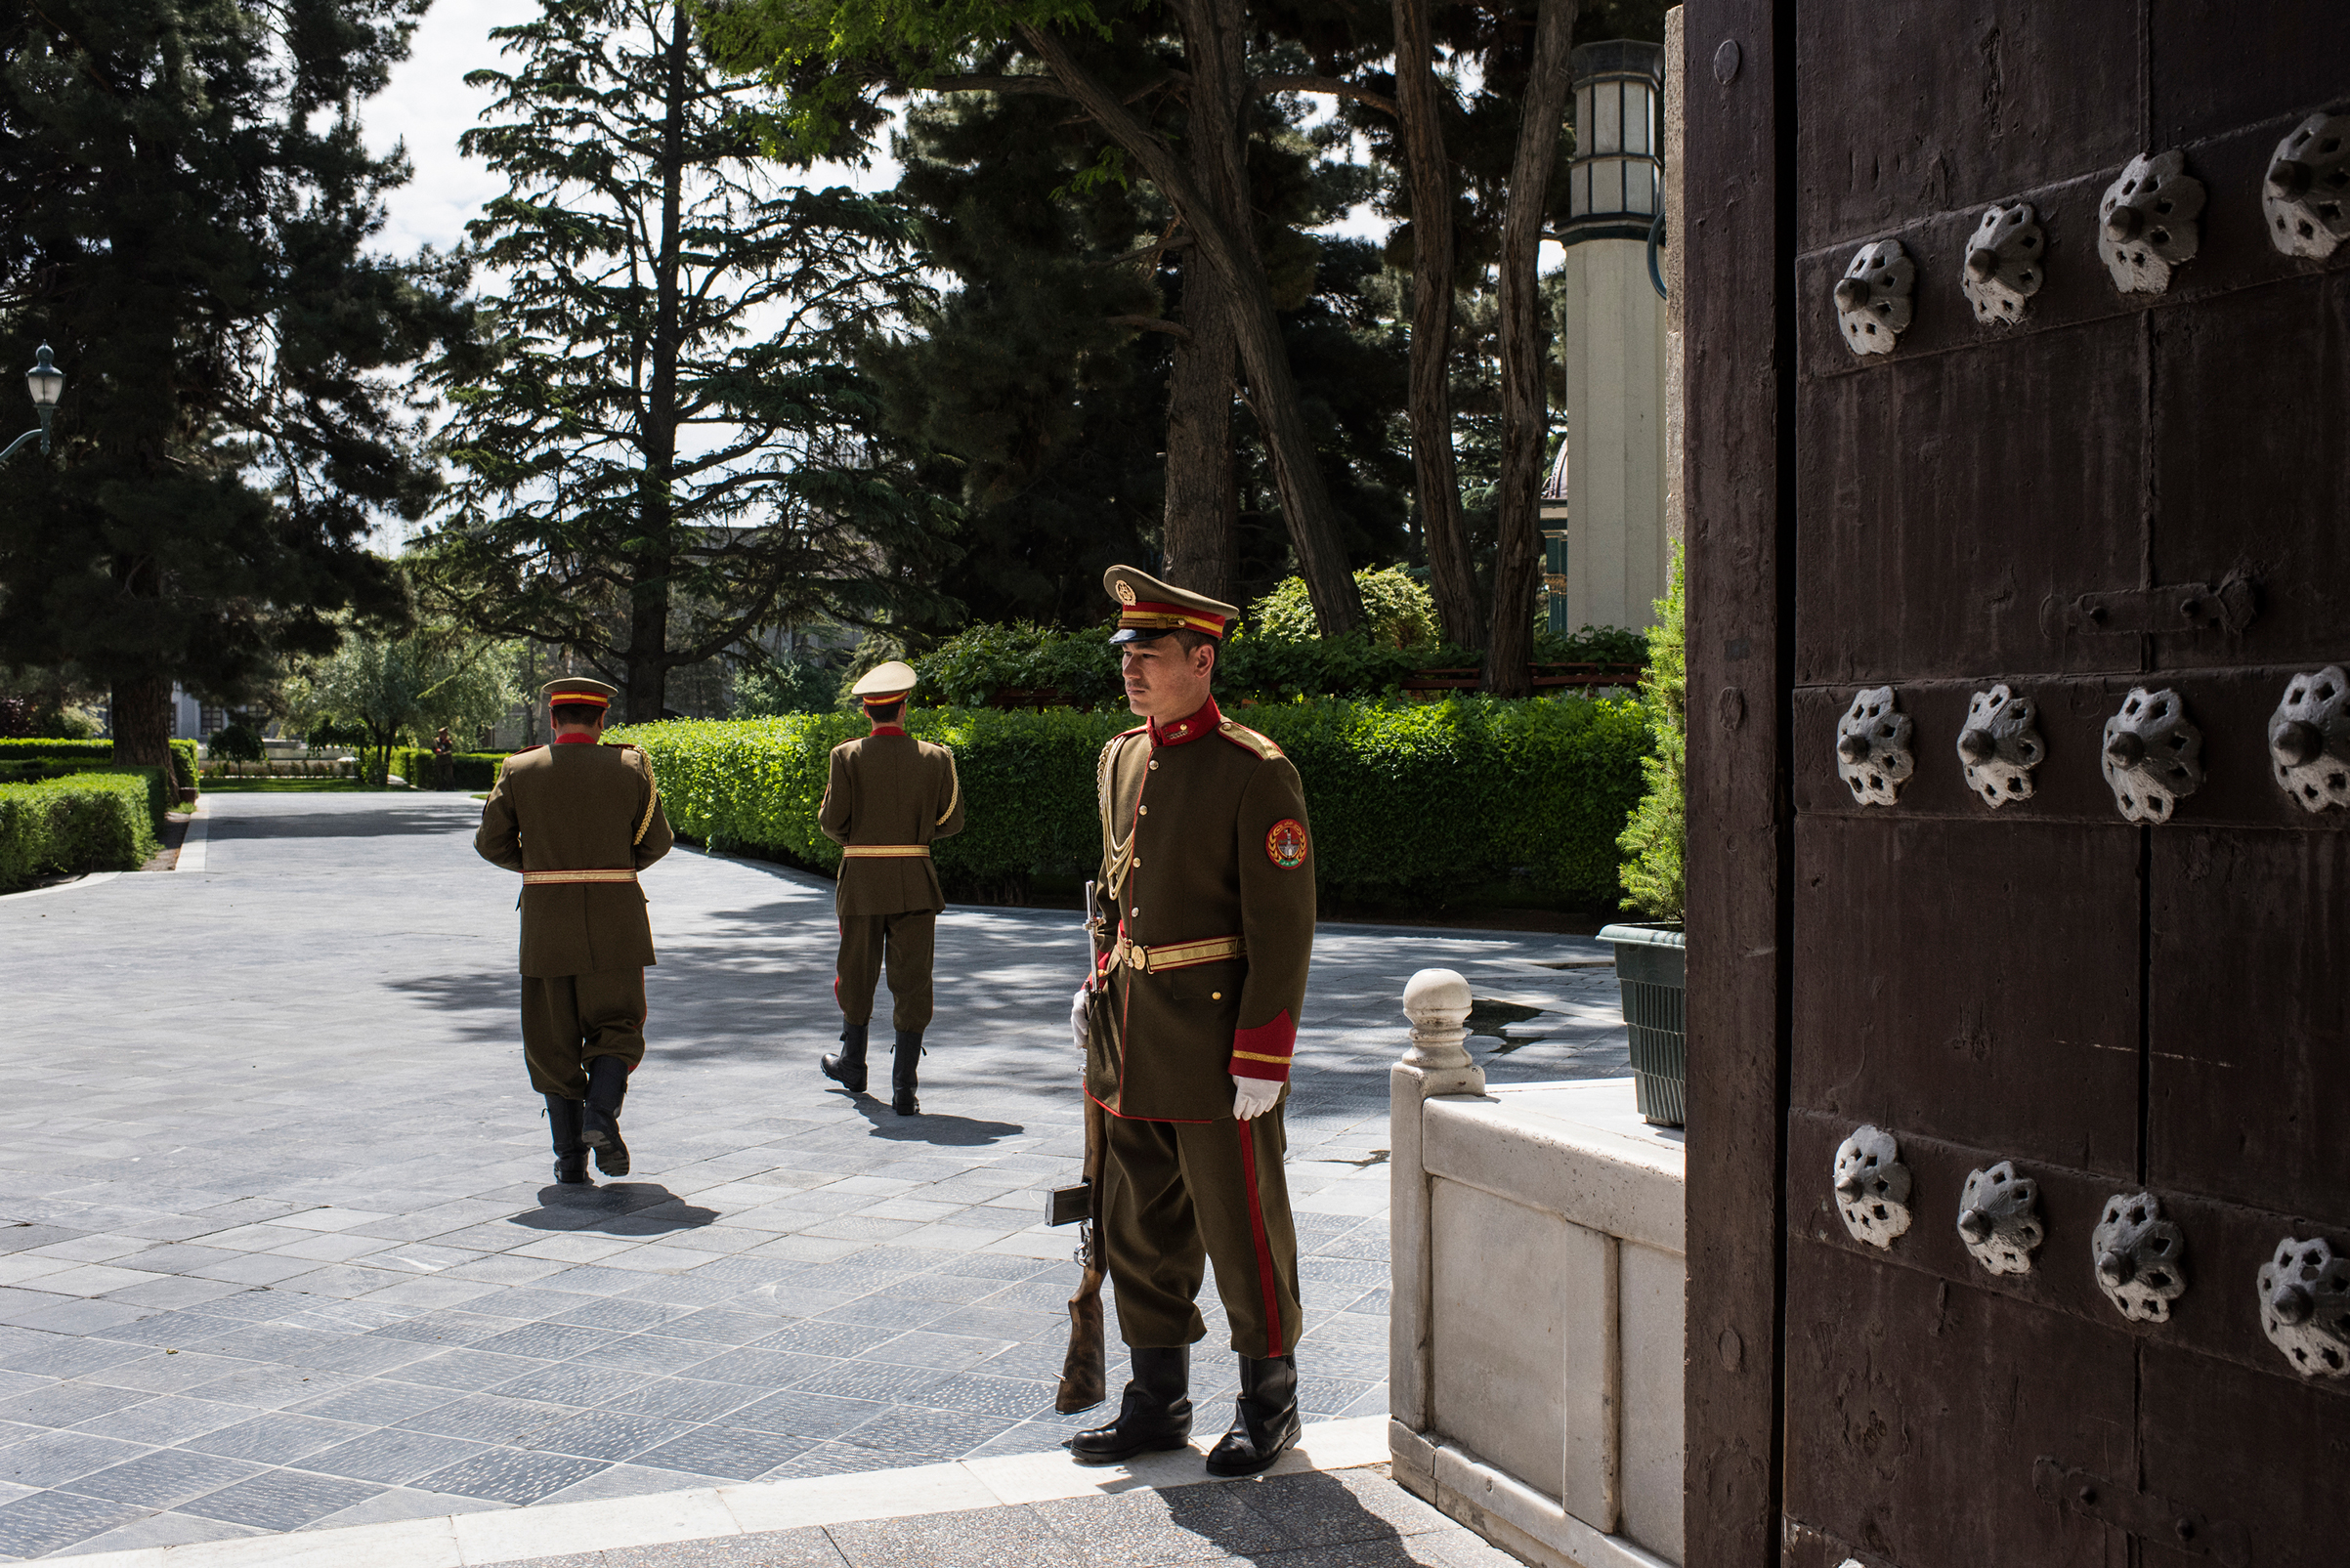 A presidential guard stands watch inside the palace compound in Kabul on May 11. (Andrew Quilty for TIME)